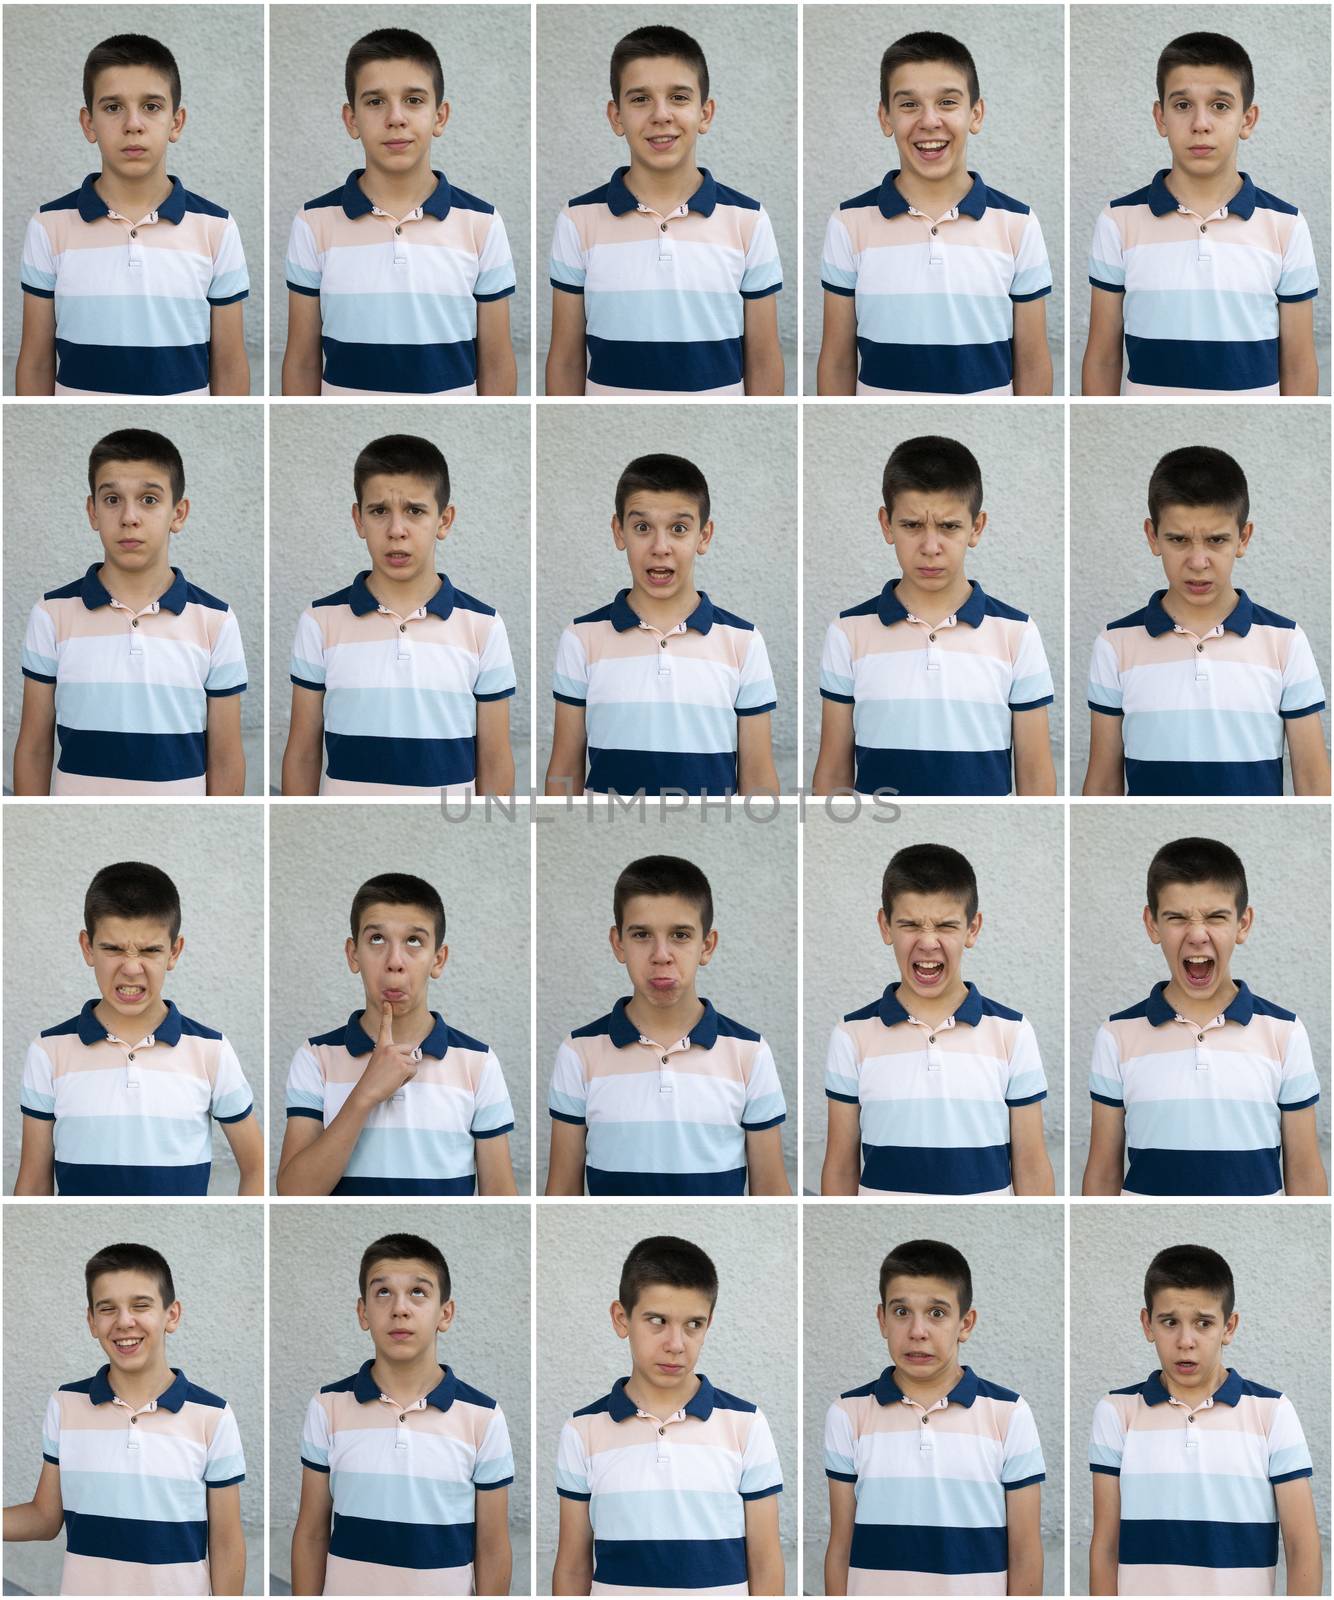 Child faces. Many faces showing emotions and expressions. Teenager face countenance. 